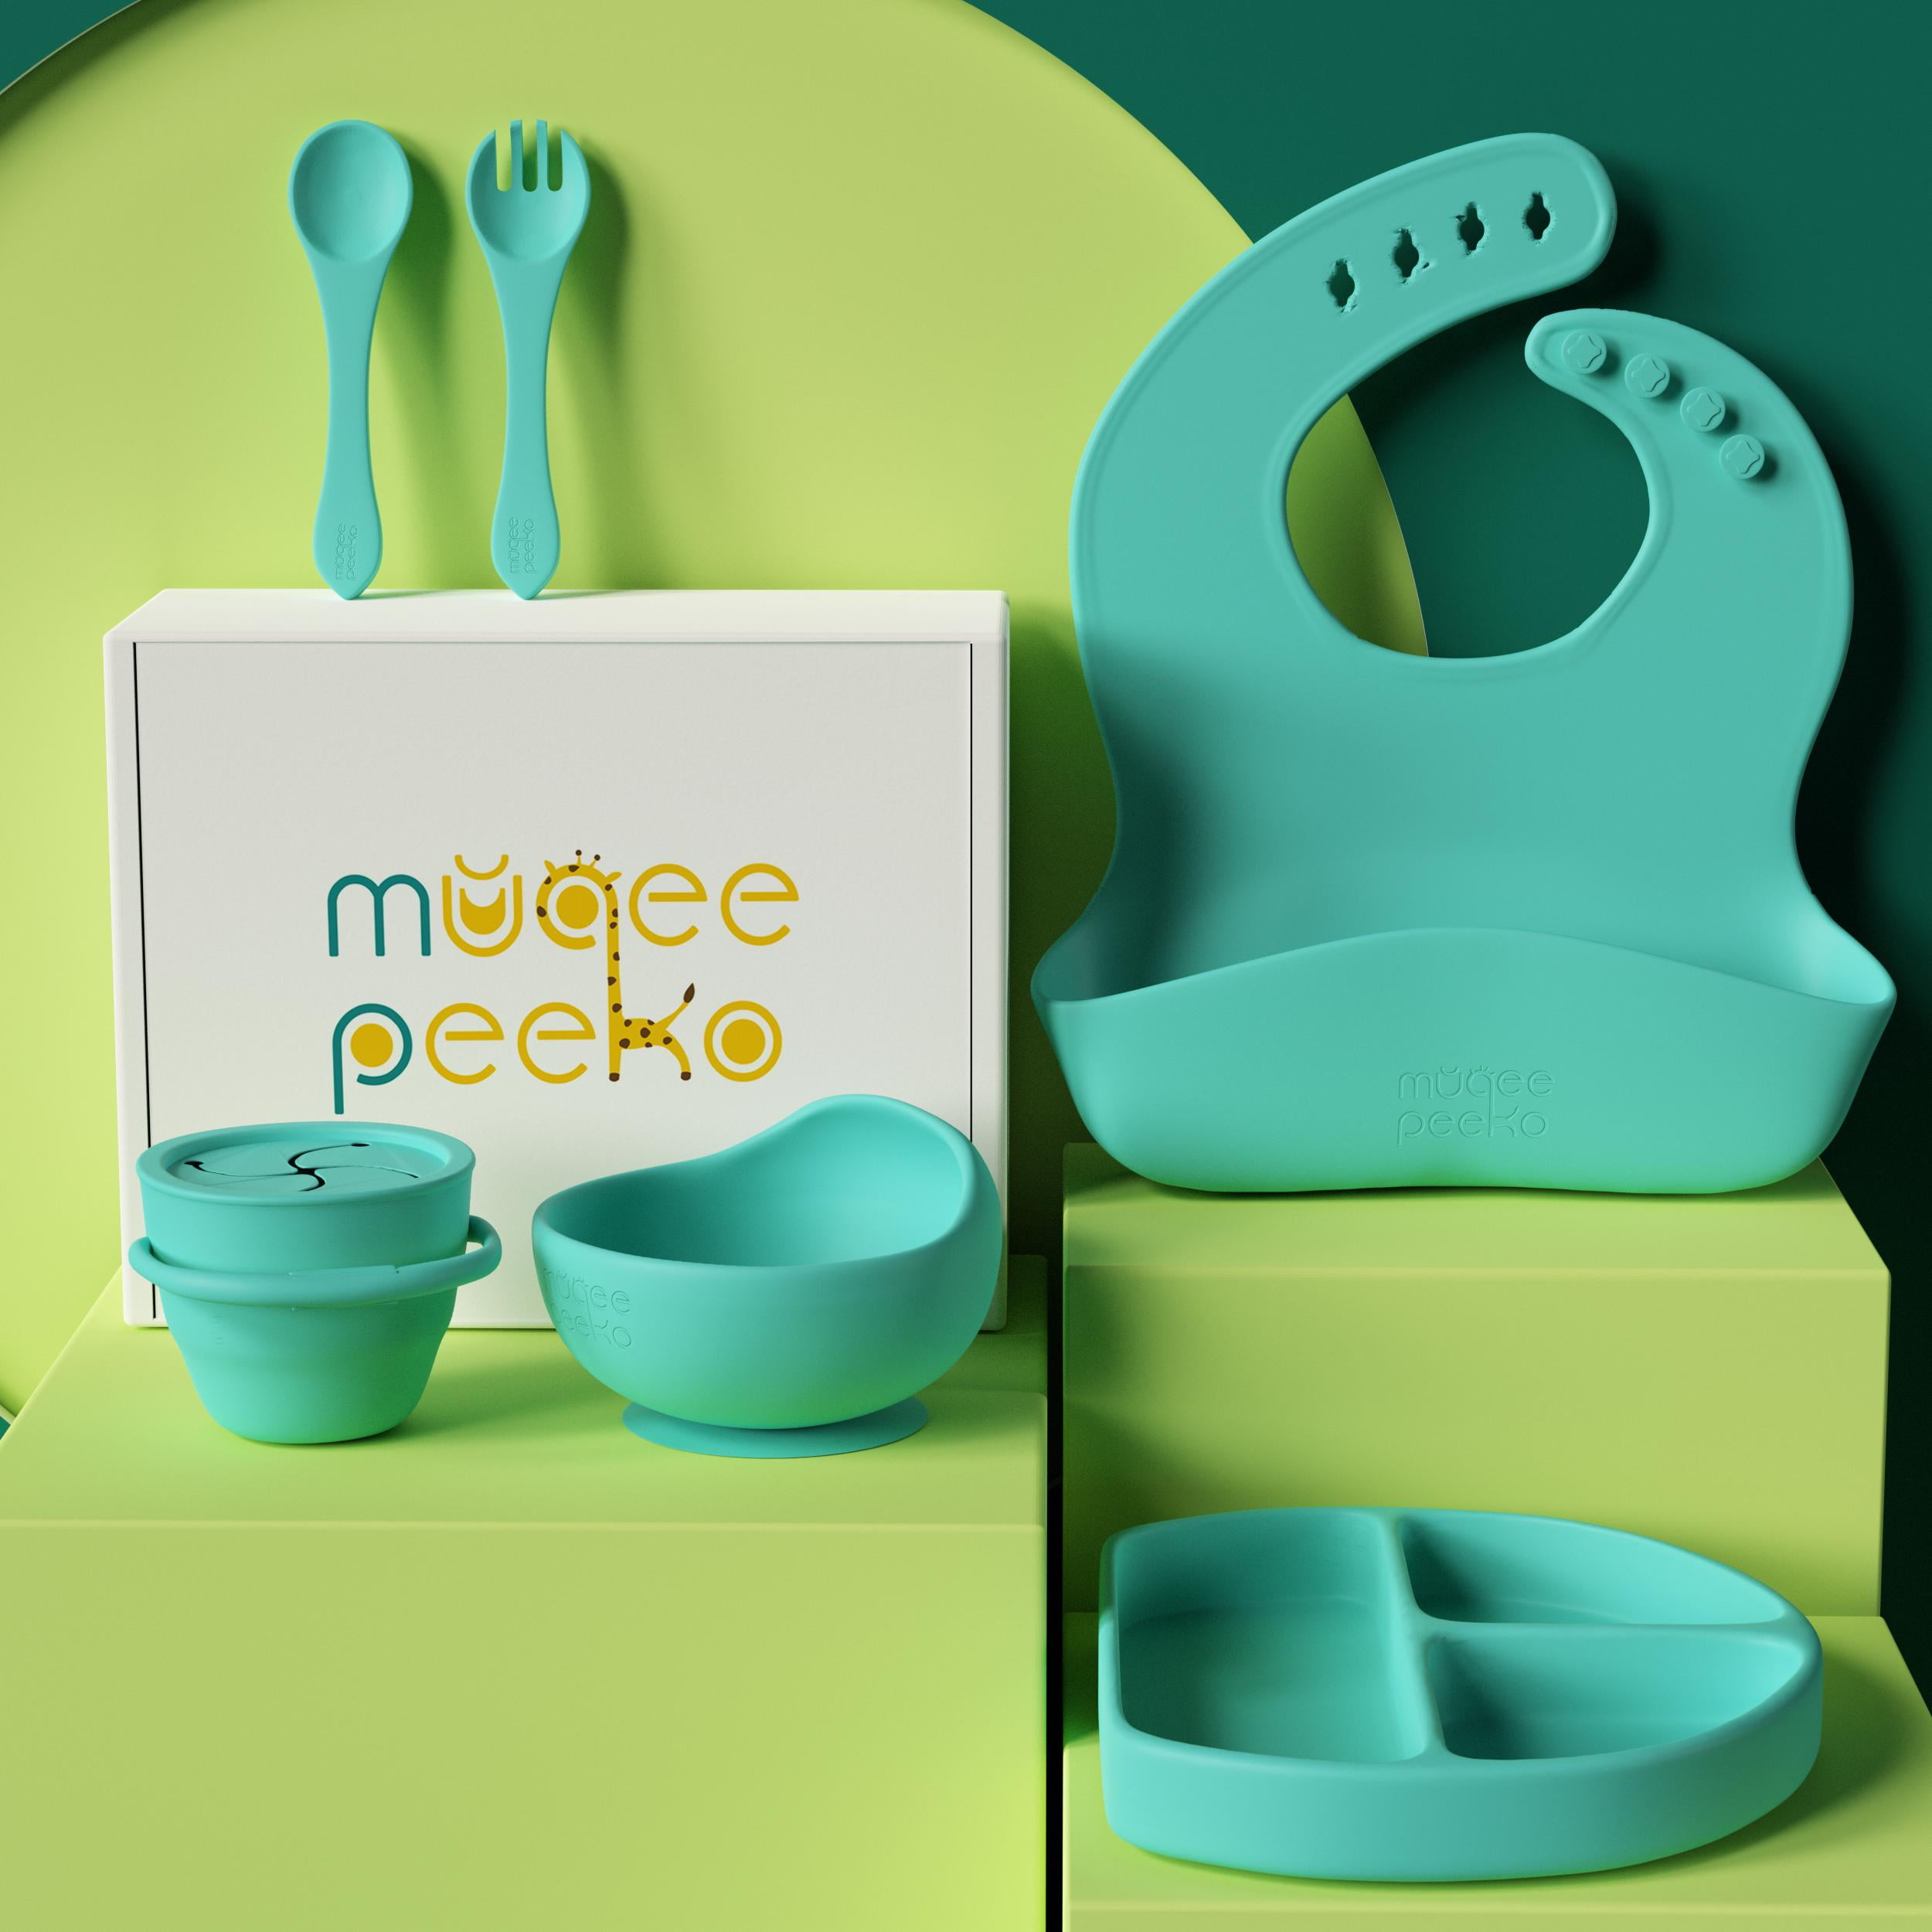 Muqee Peeko Warm Vanilla Baby Feeding Set - Toddler Self-Eating Plate Set  with Utensils - Suction Divided Plate, Food Bowl with Spoon, Fork -  Silicone Bib, Training Cup - Dishwasher-Safe (6 Piece